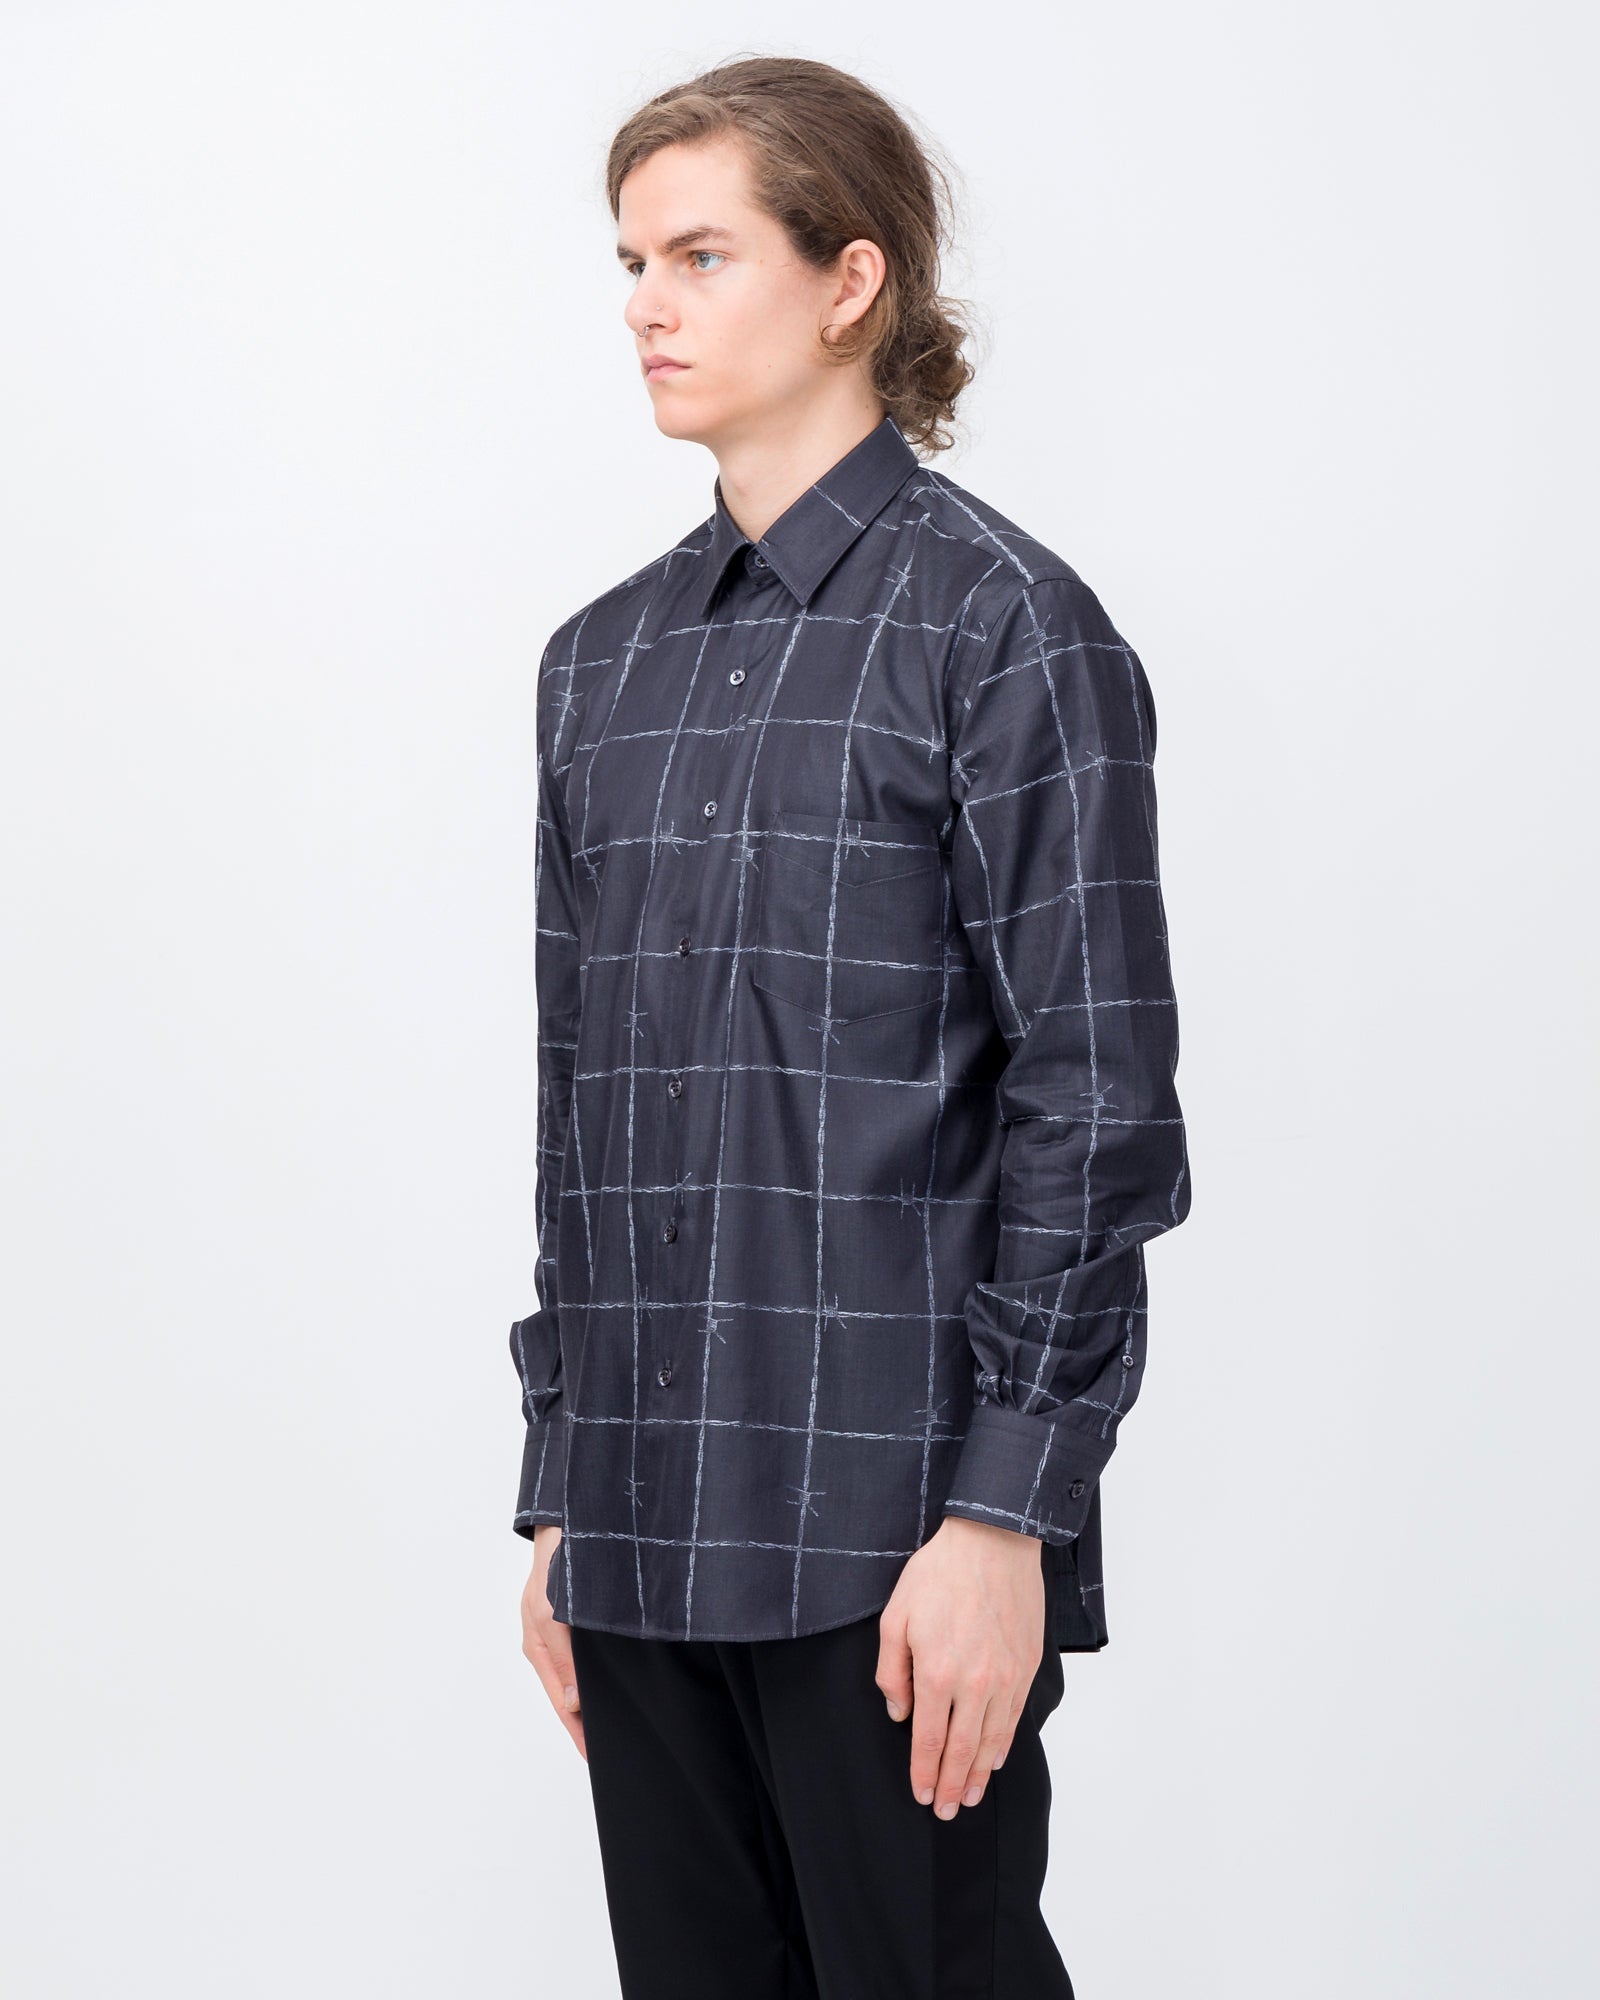 Model 1 Shirt in Wire